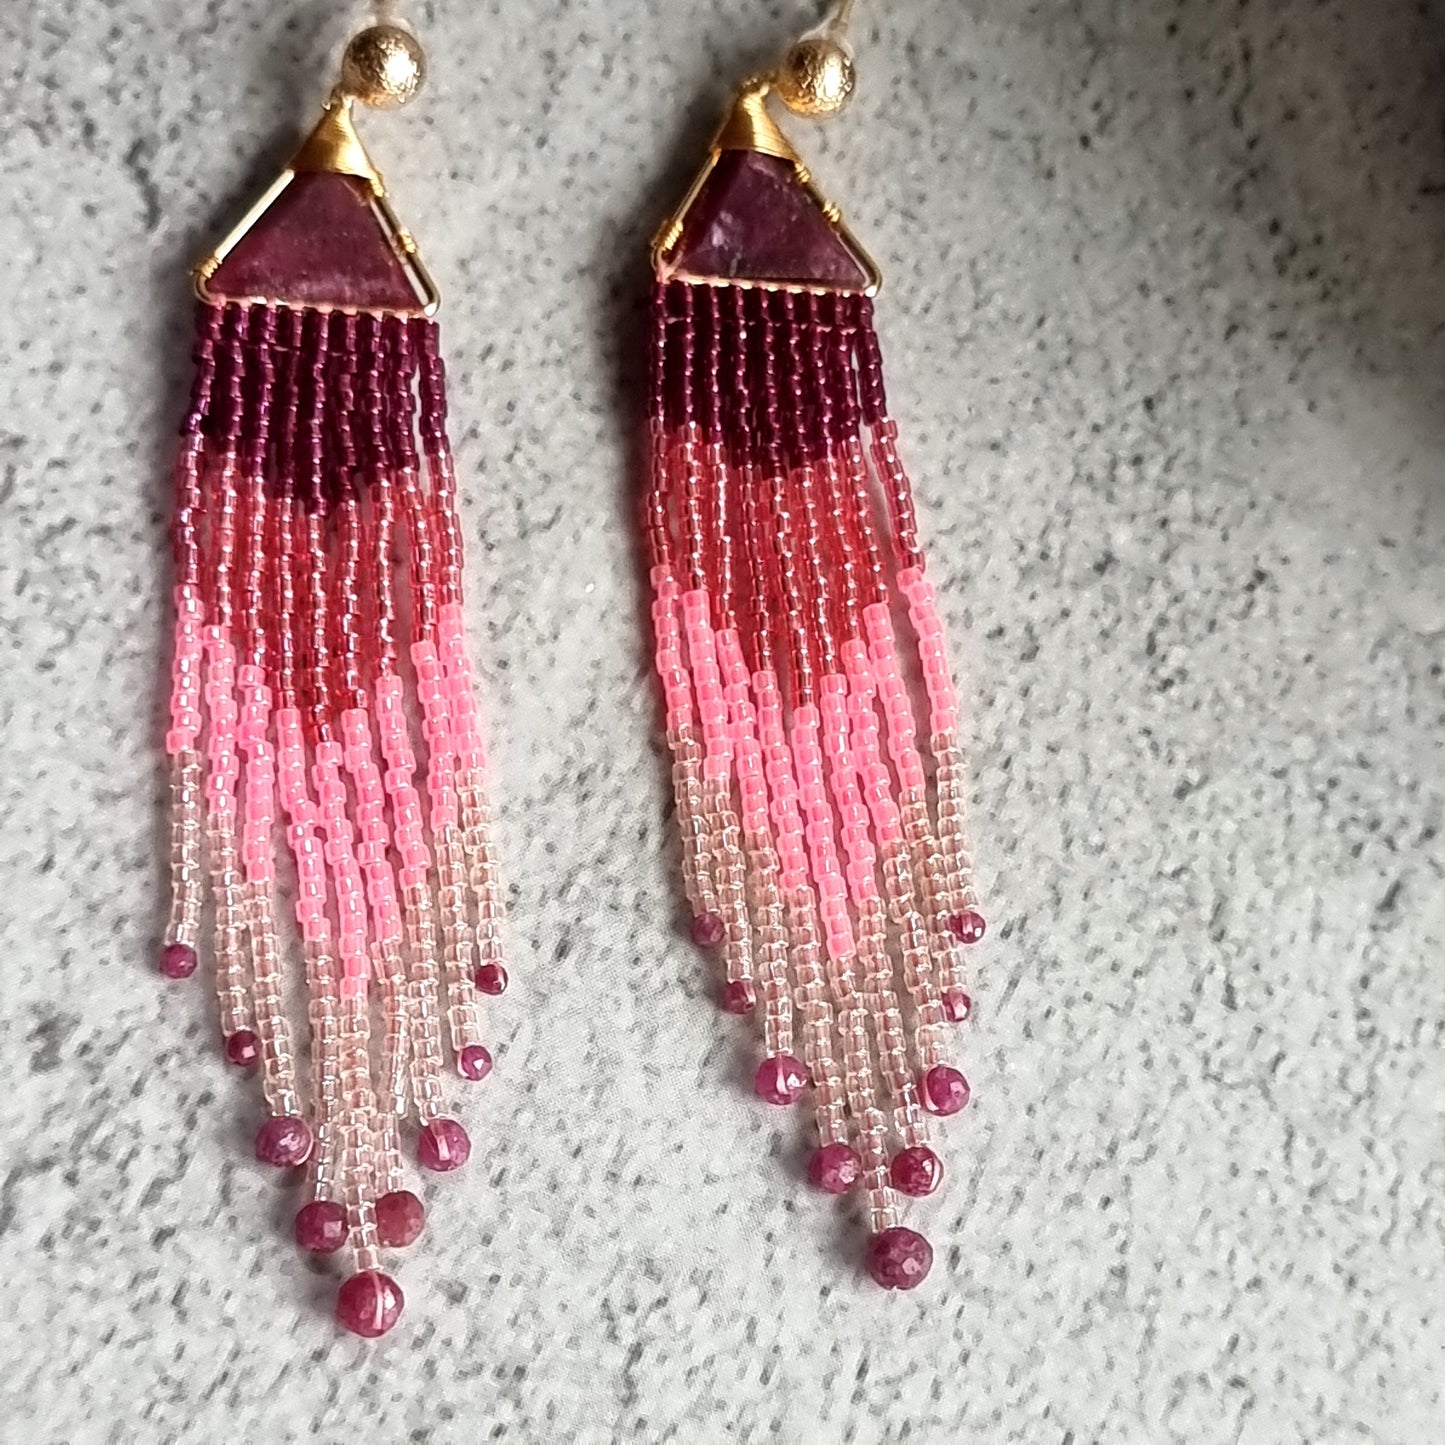 Mozambique Ruby Triangle Gemstone with Ombre Fringe Earrings